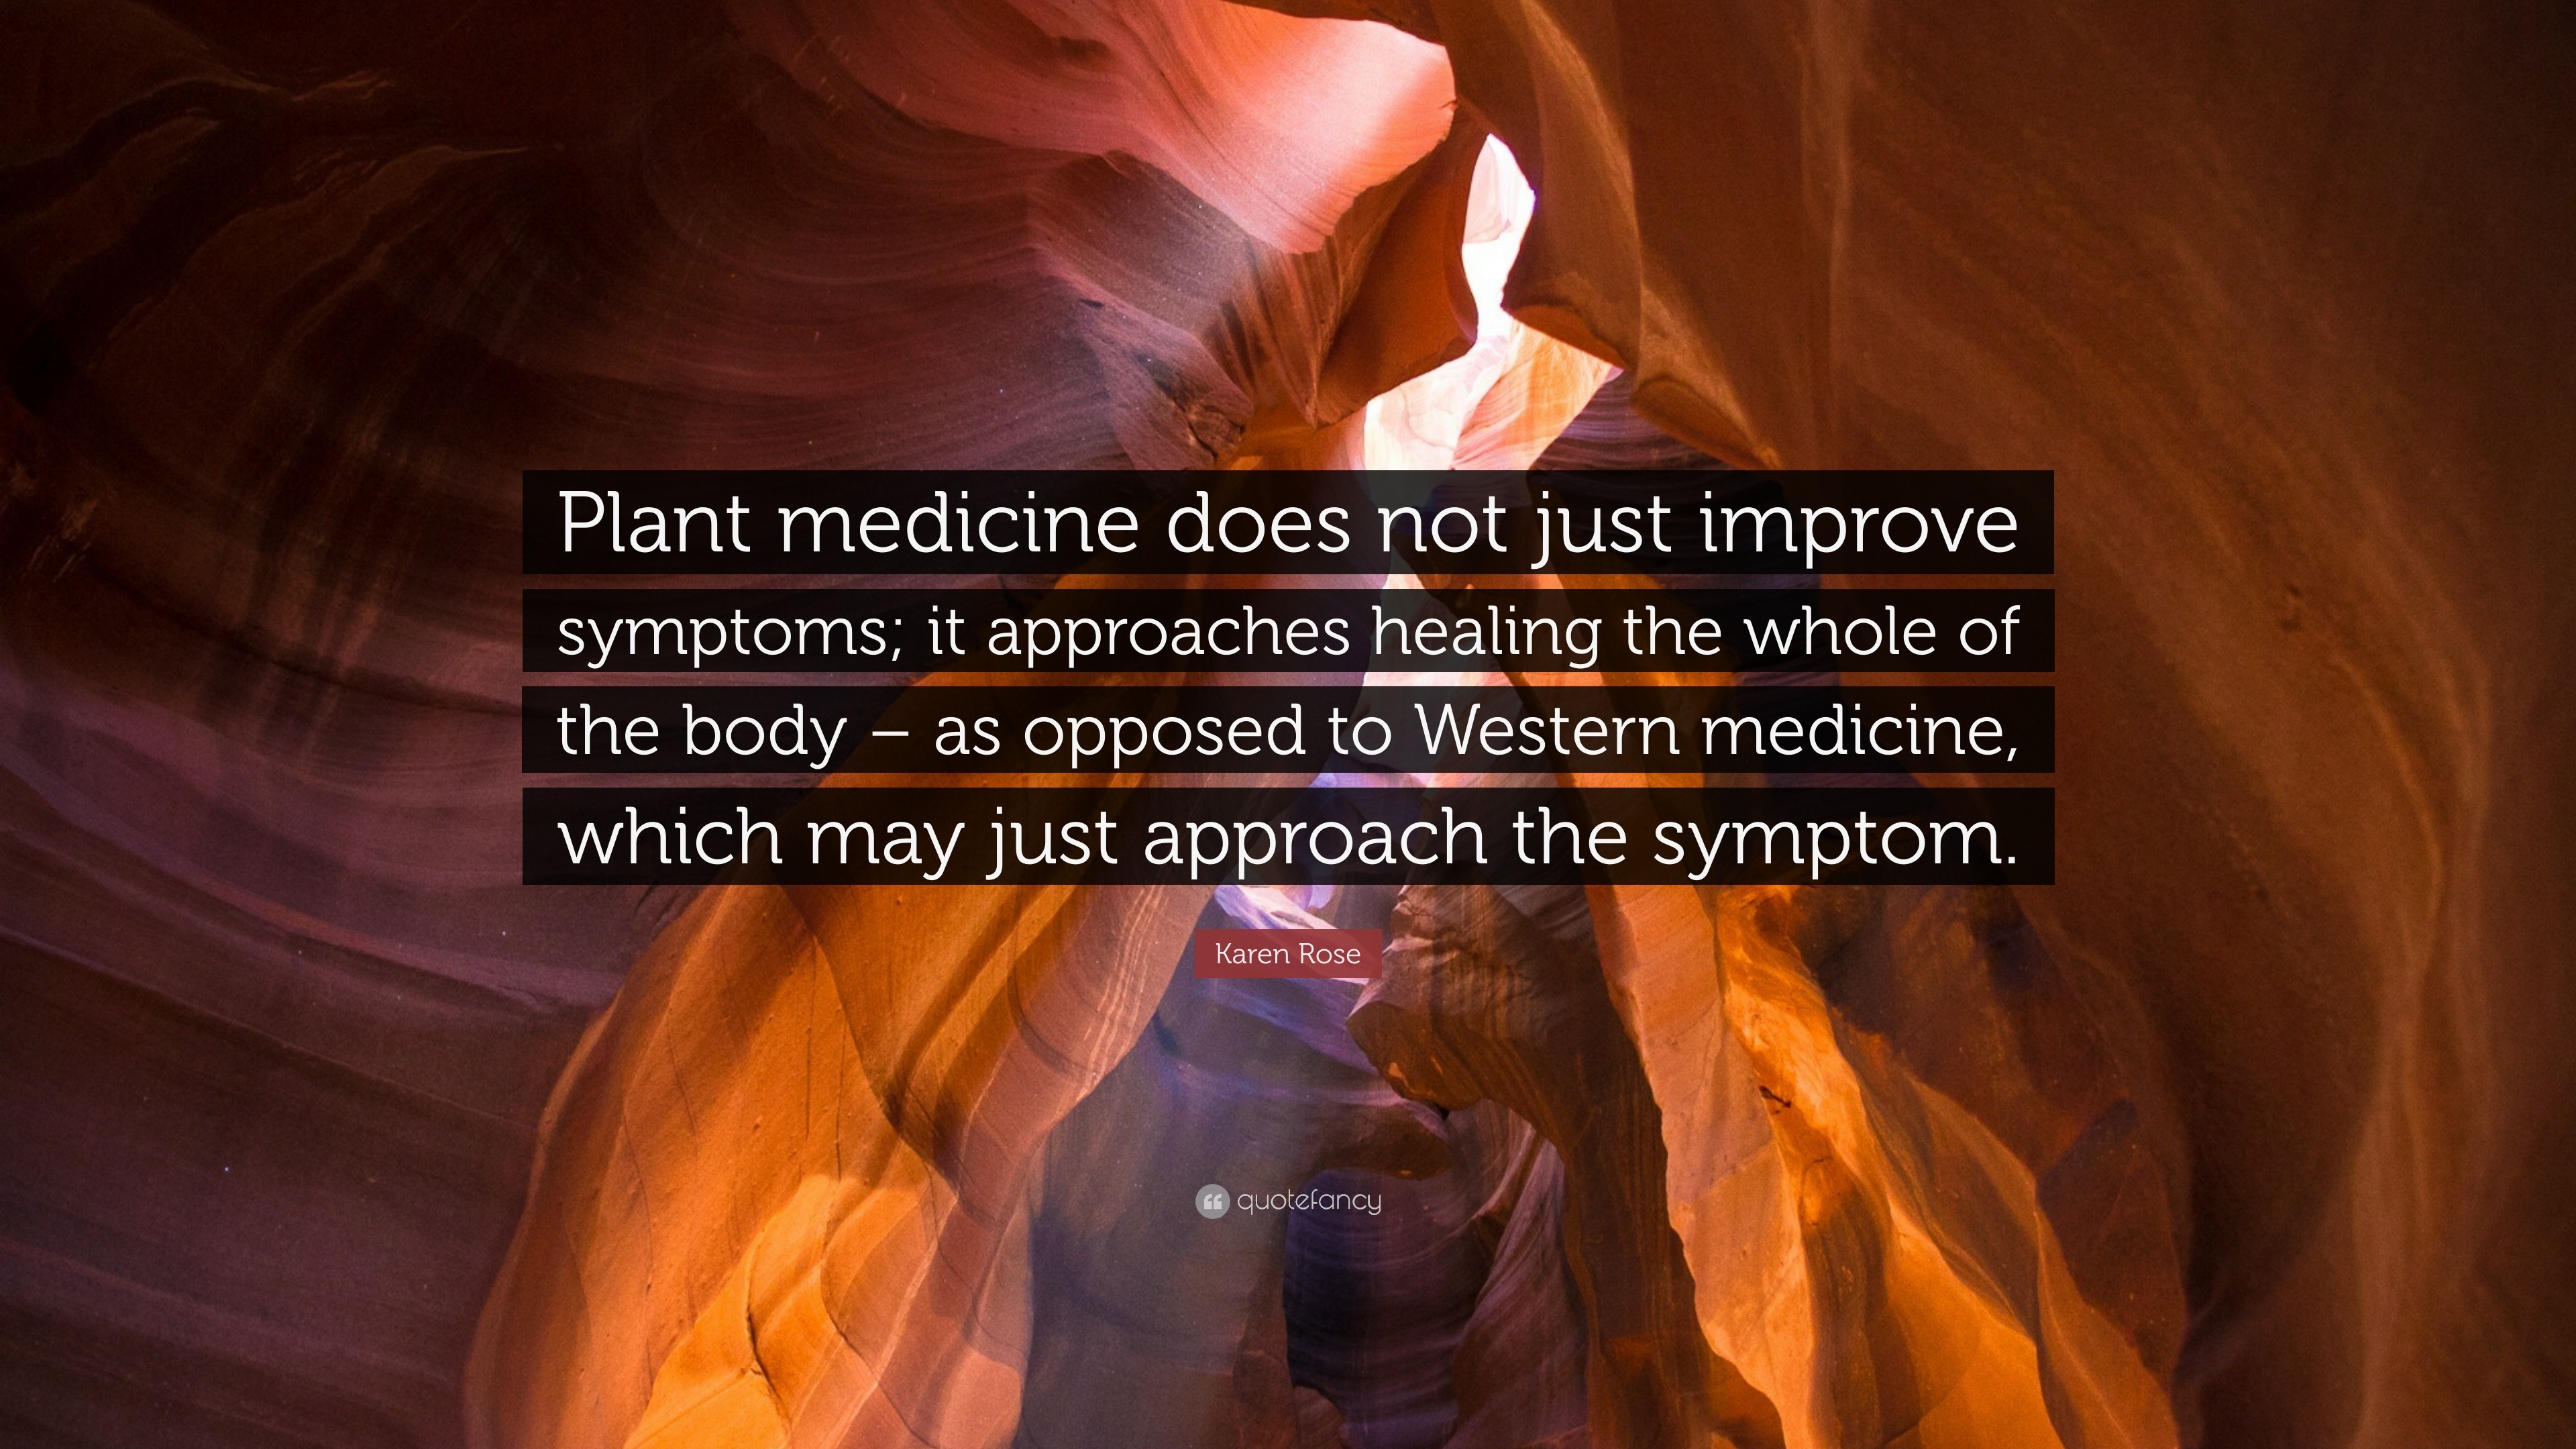 Karen Rose Quote: “Plant does not just improve symptoms; it approaches healing the whole of body as opposed to Western medic...”